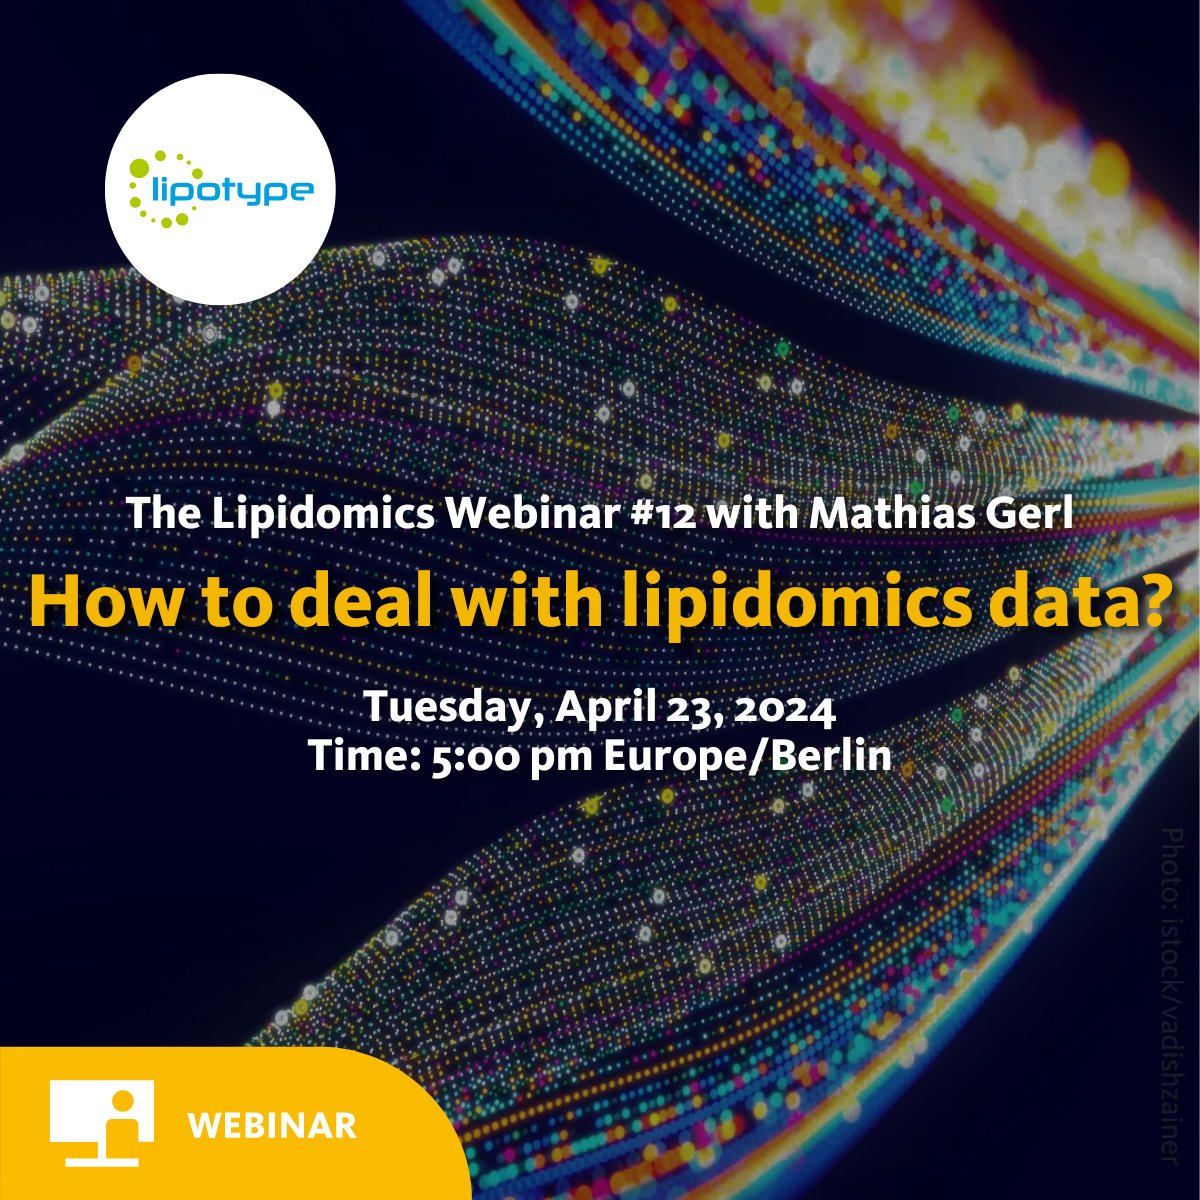 Join us for 'How to deal with lipidomics data?: The Lipidomics Webinar #12' presented by Dr. Mathias Gerl, Head of Data Science, on Tuesday, April 23, 2024, at 5:00 pm (Europe/Berlin time). Save your spot now 👉 lipotype.com/lipidomics-web… #Lipidomics #DataAnalysis #Webinar